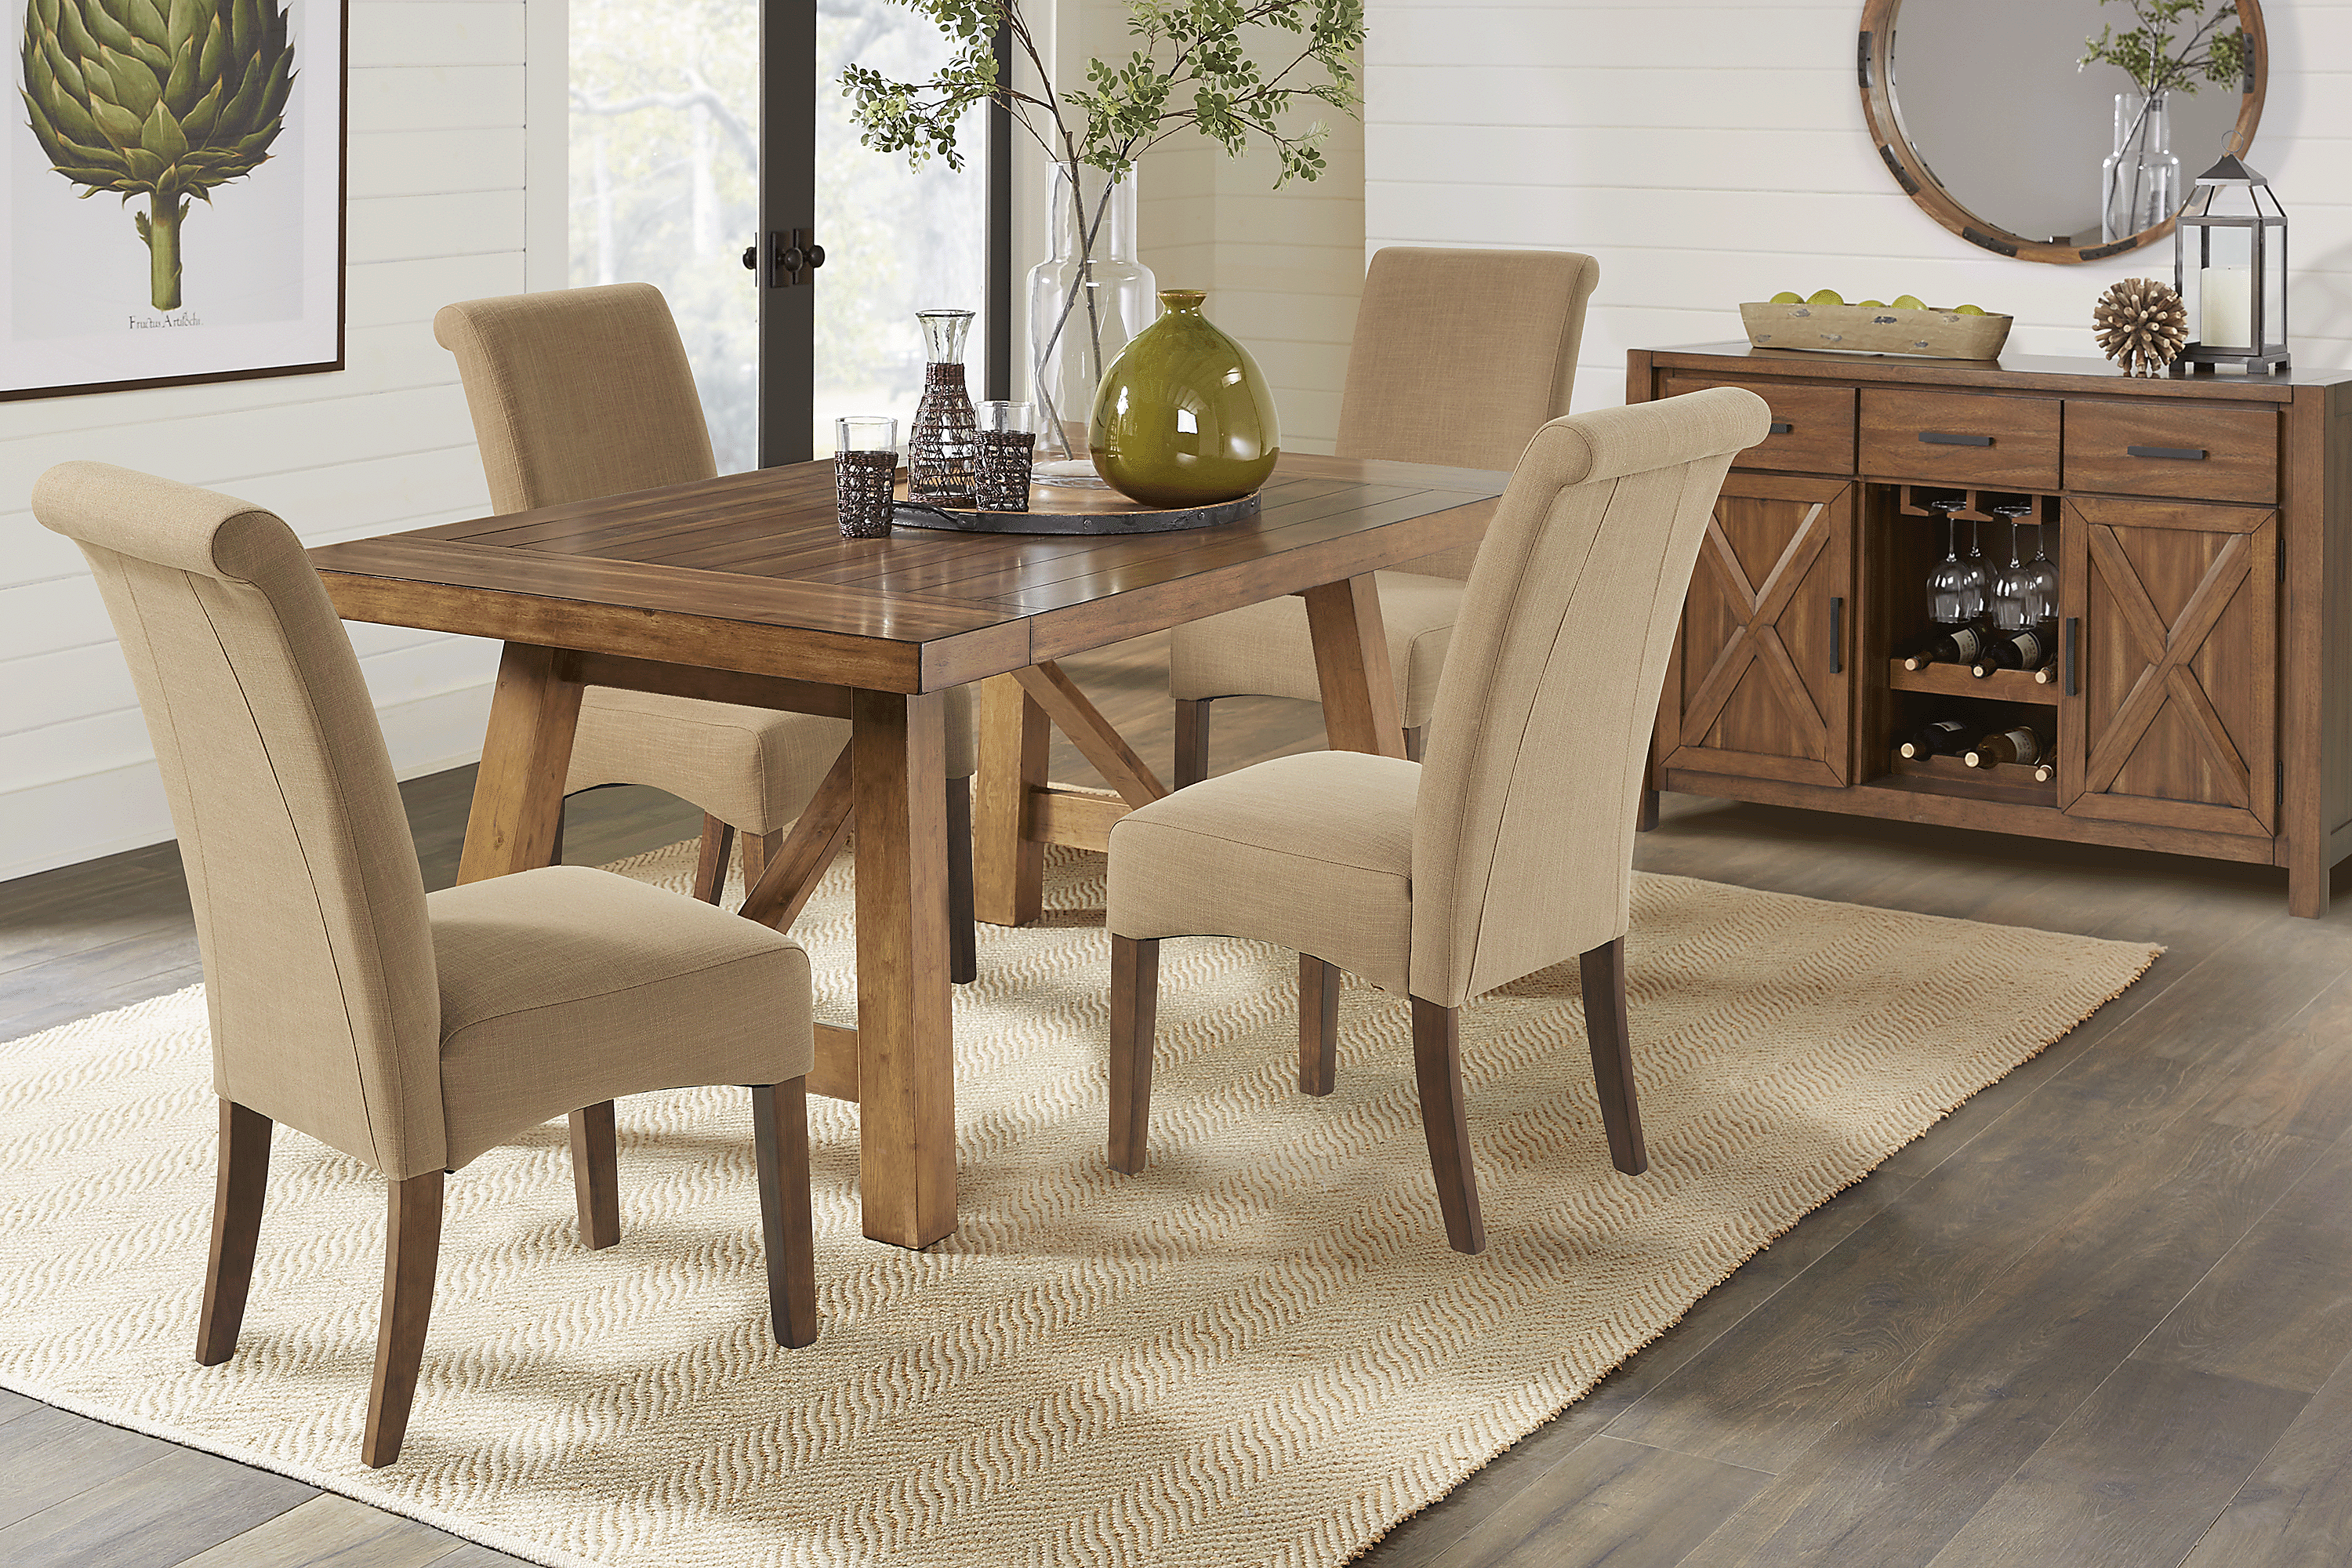 Set　Dining　Room　Table,　Chair　With　Go　Dining　Acorn　Rooms　Pc　Cottage　Dark　Side　Brown　Wood　To